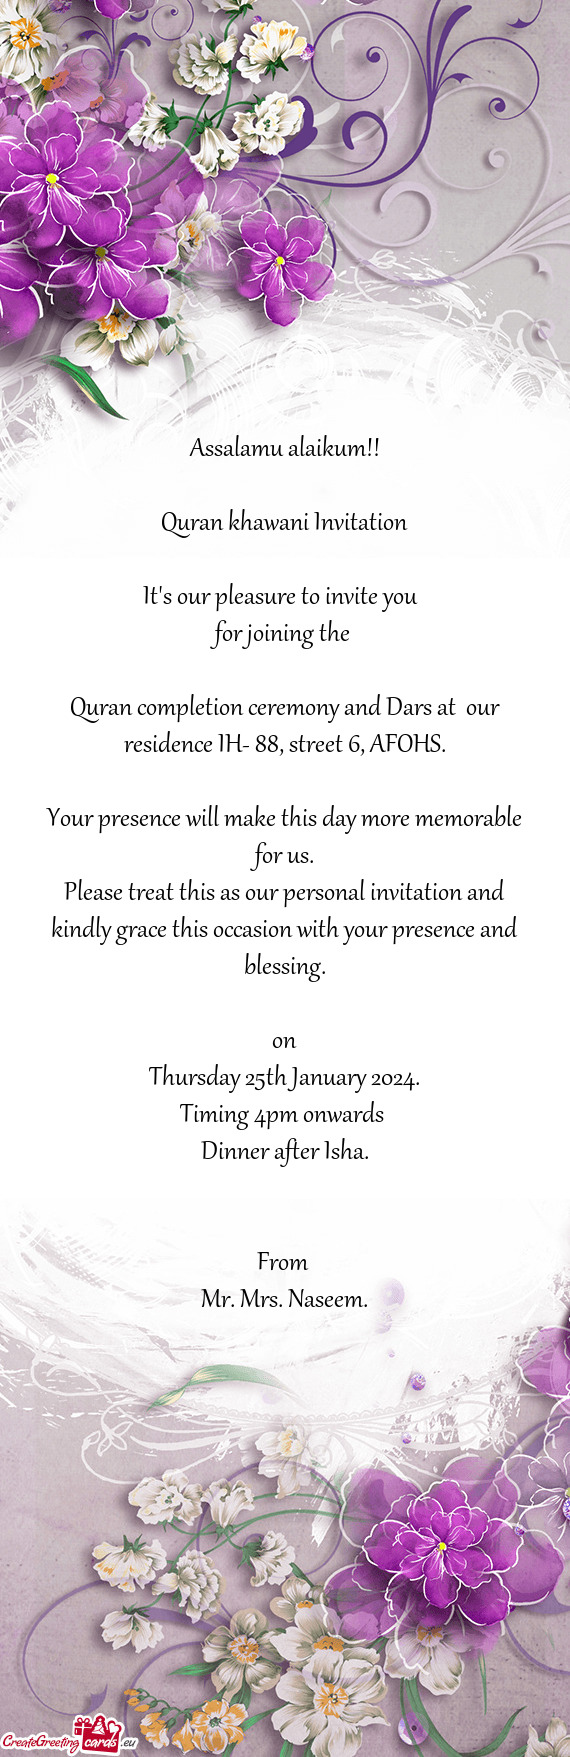 Quran completion ceremony and Dars at our residence IH- 88, street 6, AFOHS